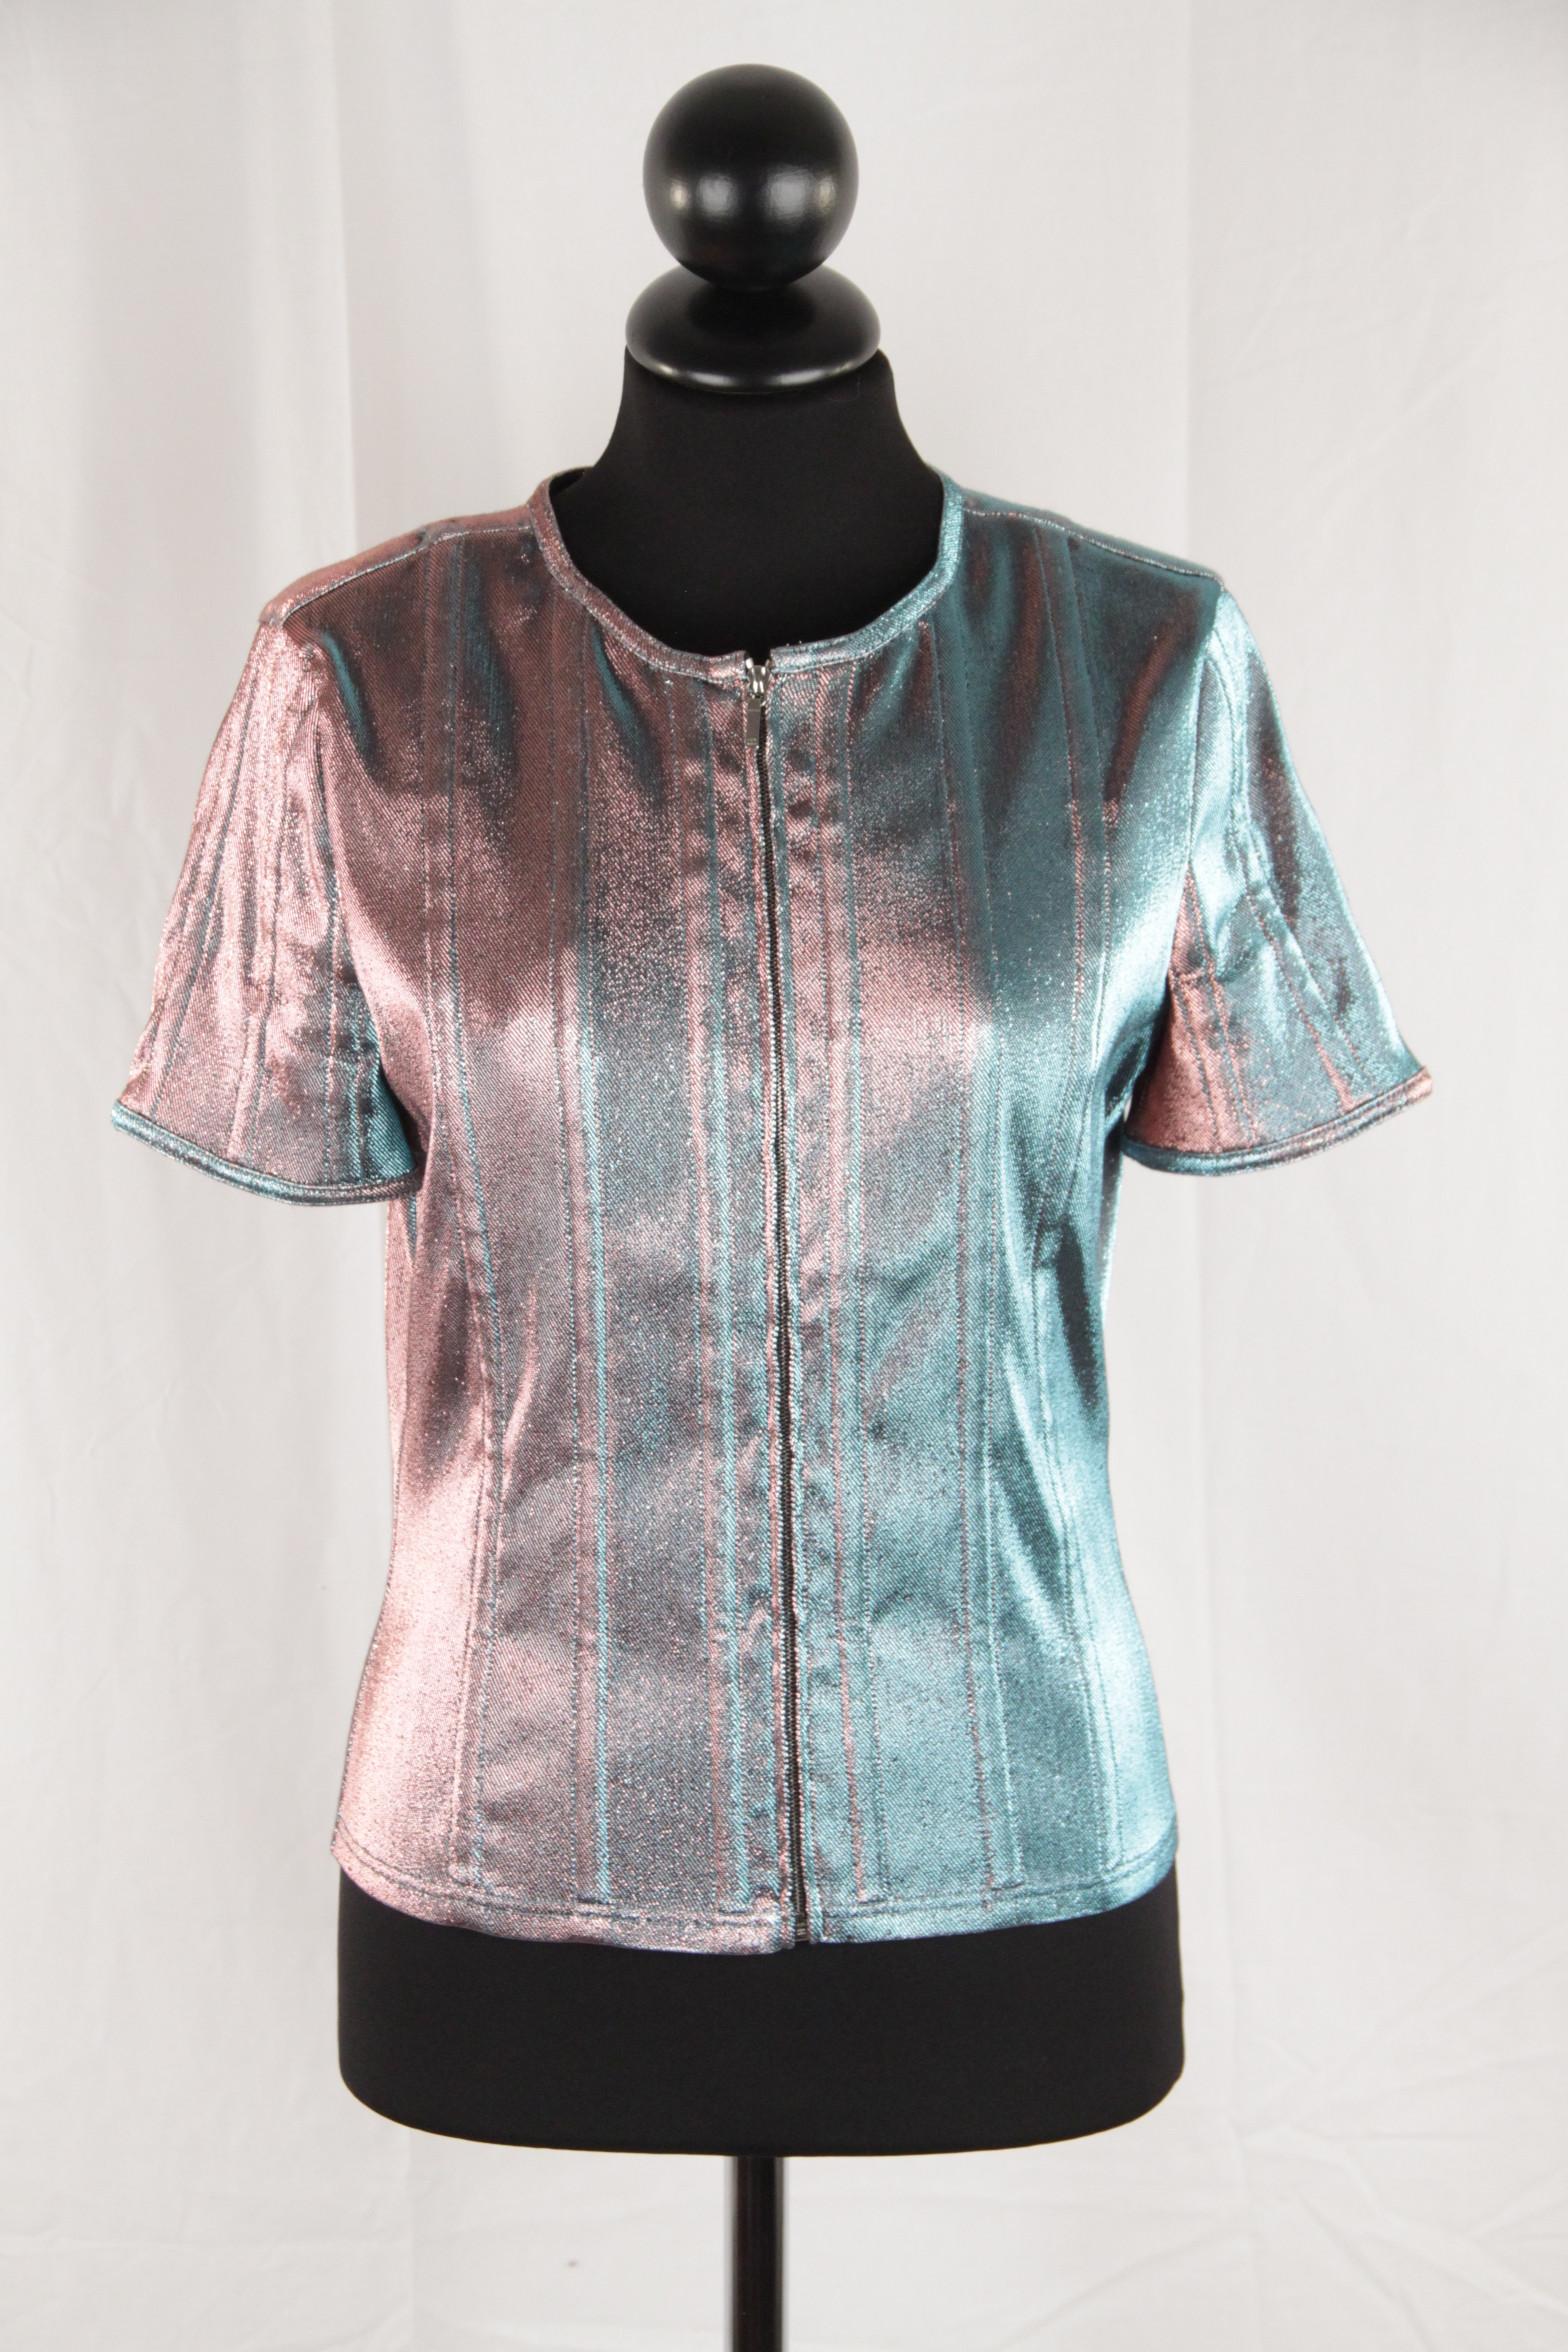 
Chanel Iridescent Changing Lame Short Sleeve Jacket Zip Front Top Size 40

- Short Sleeve styling
- Color: Blue/Pink - Iridescent
- Composition: 41% cotton, 33% nylon, 21% polyester, 5% spandex
- Collarless design
- Unlined
- Front zip closure
-